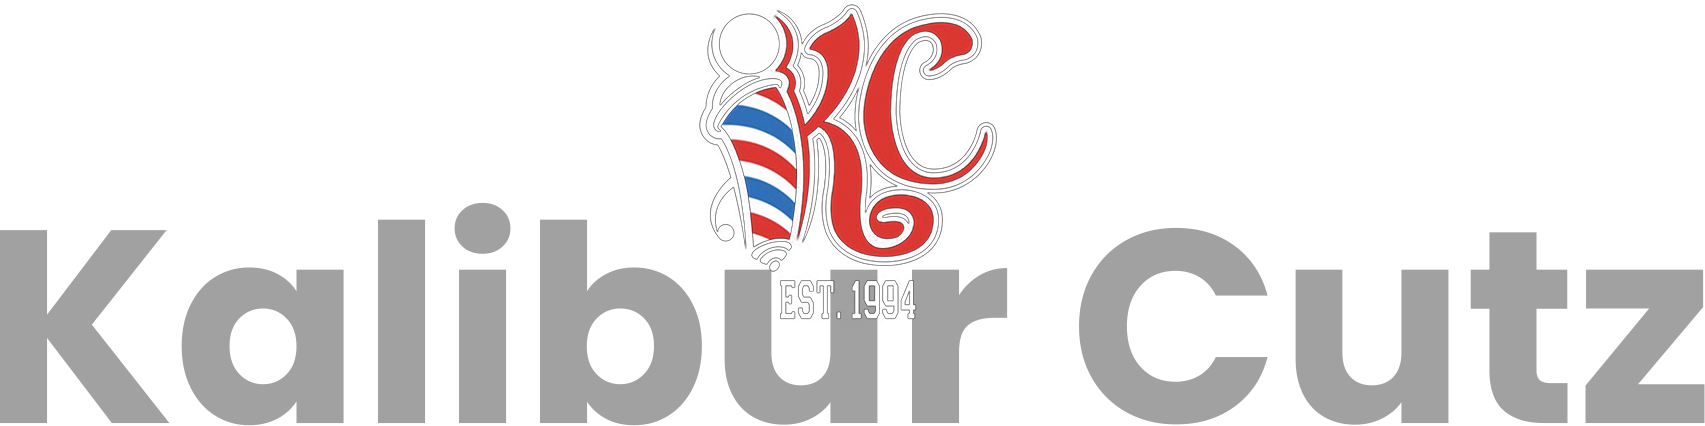 A picture of the kc barber shop logo.